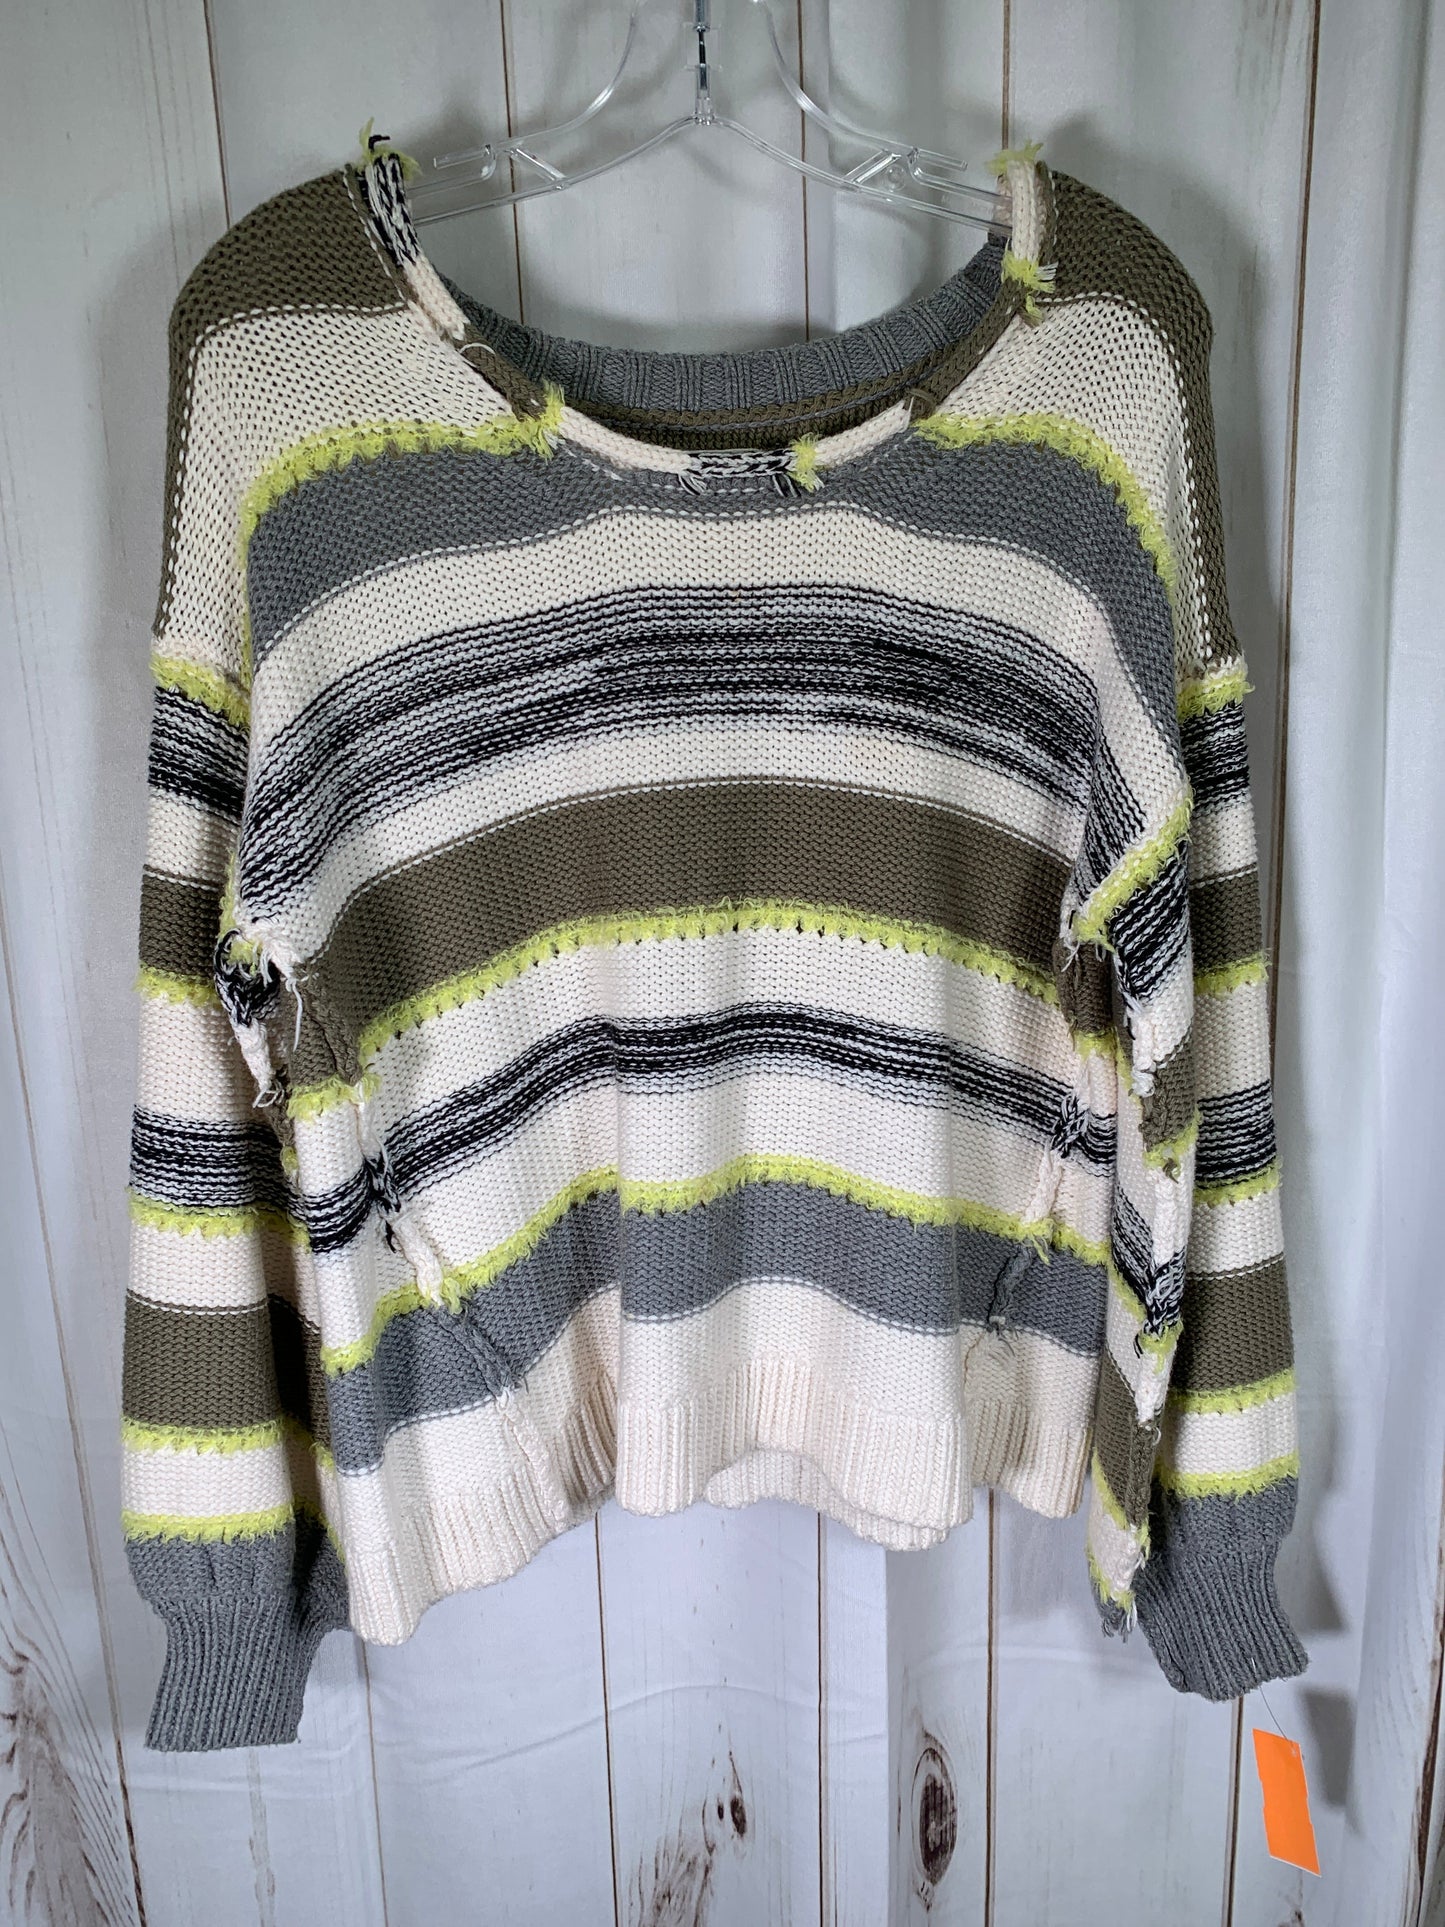 Sweater By Lou And Grey  Size: Xs